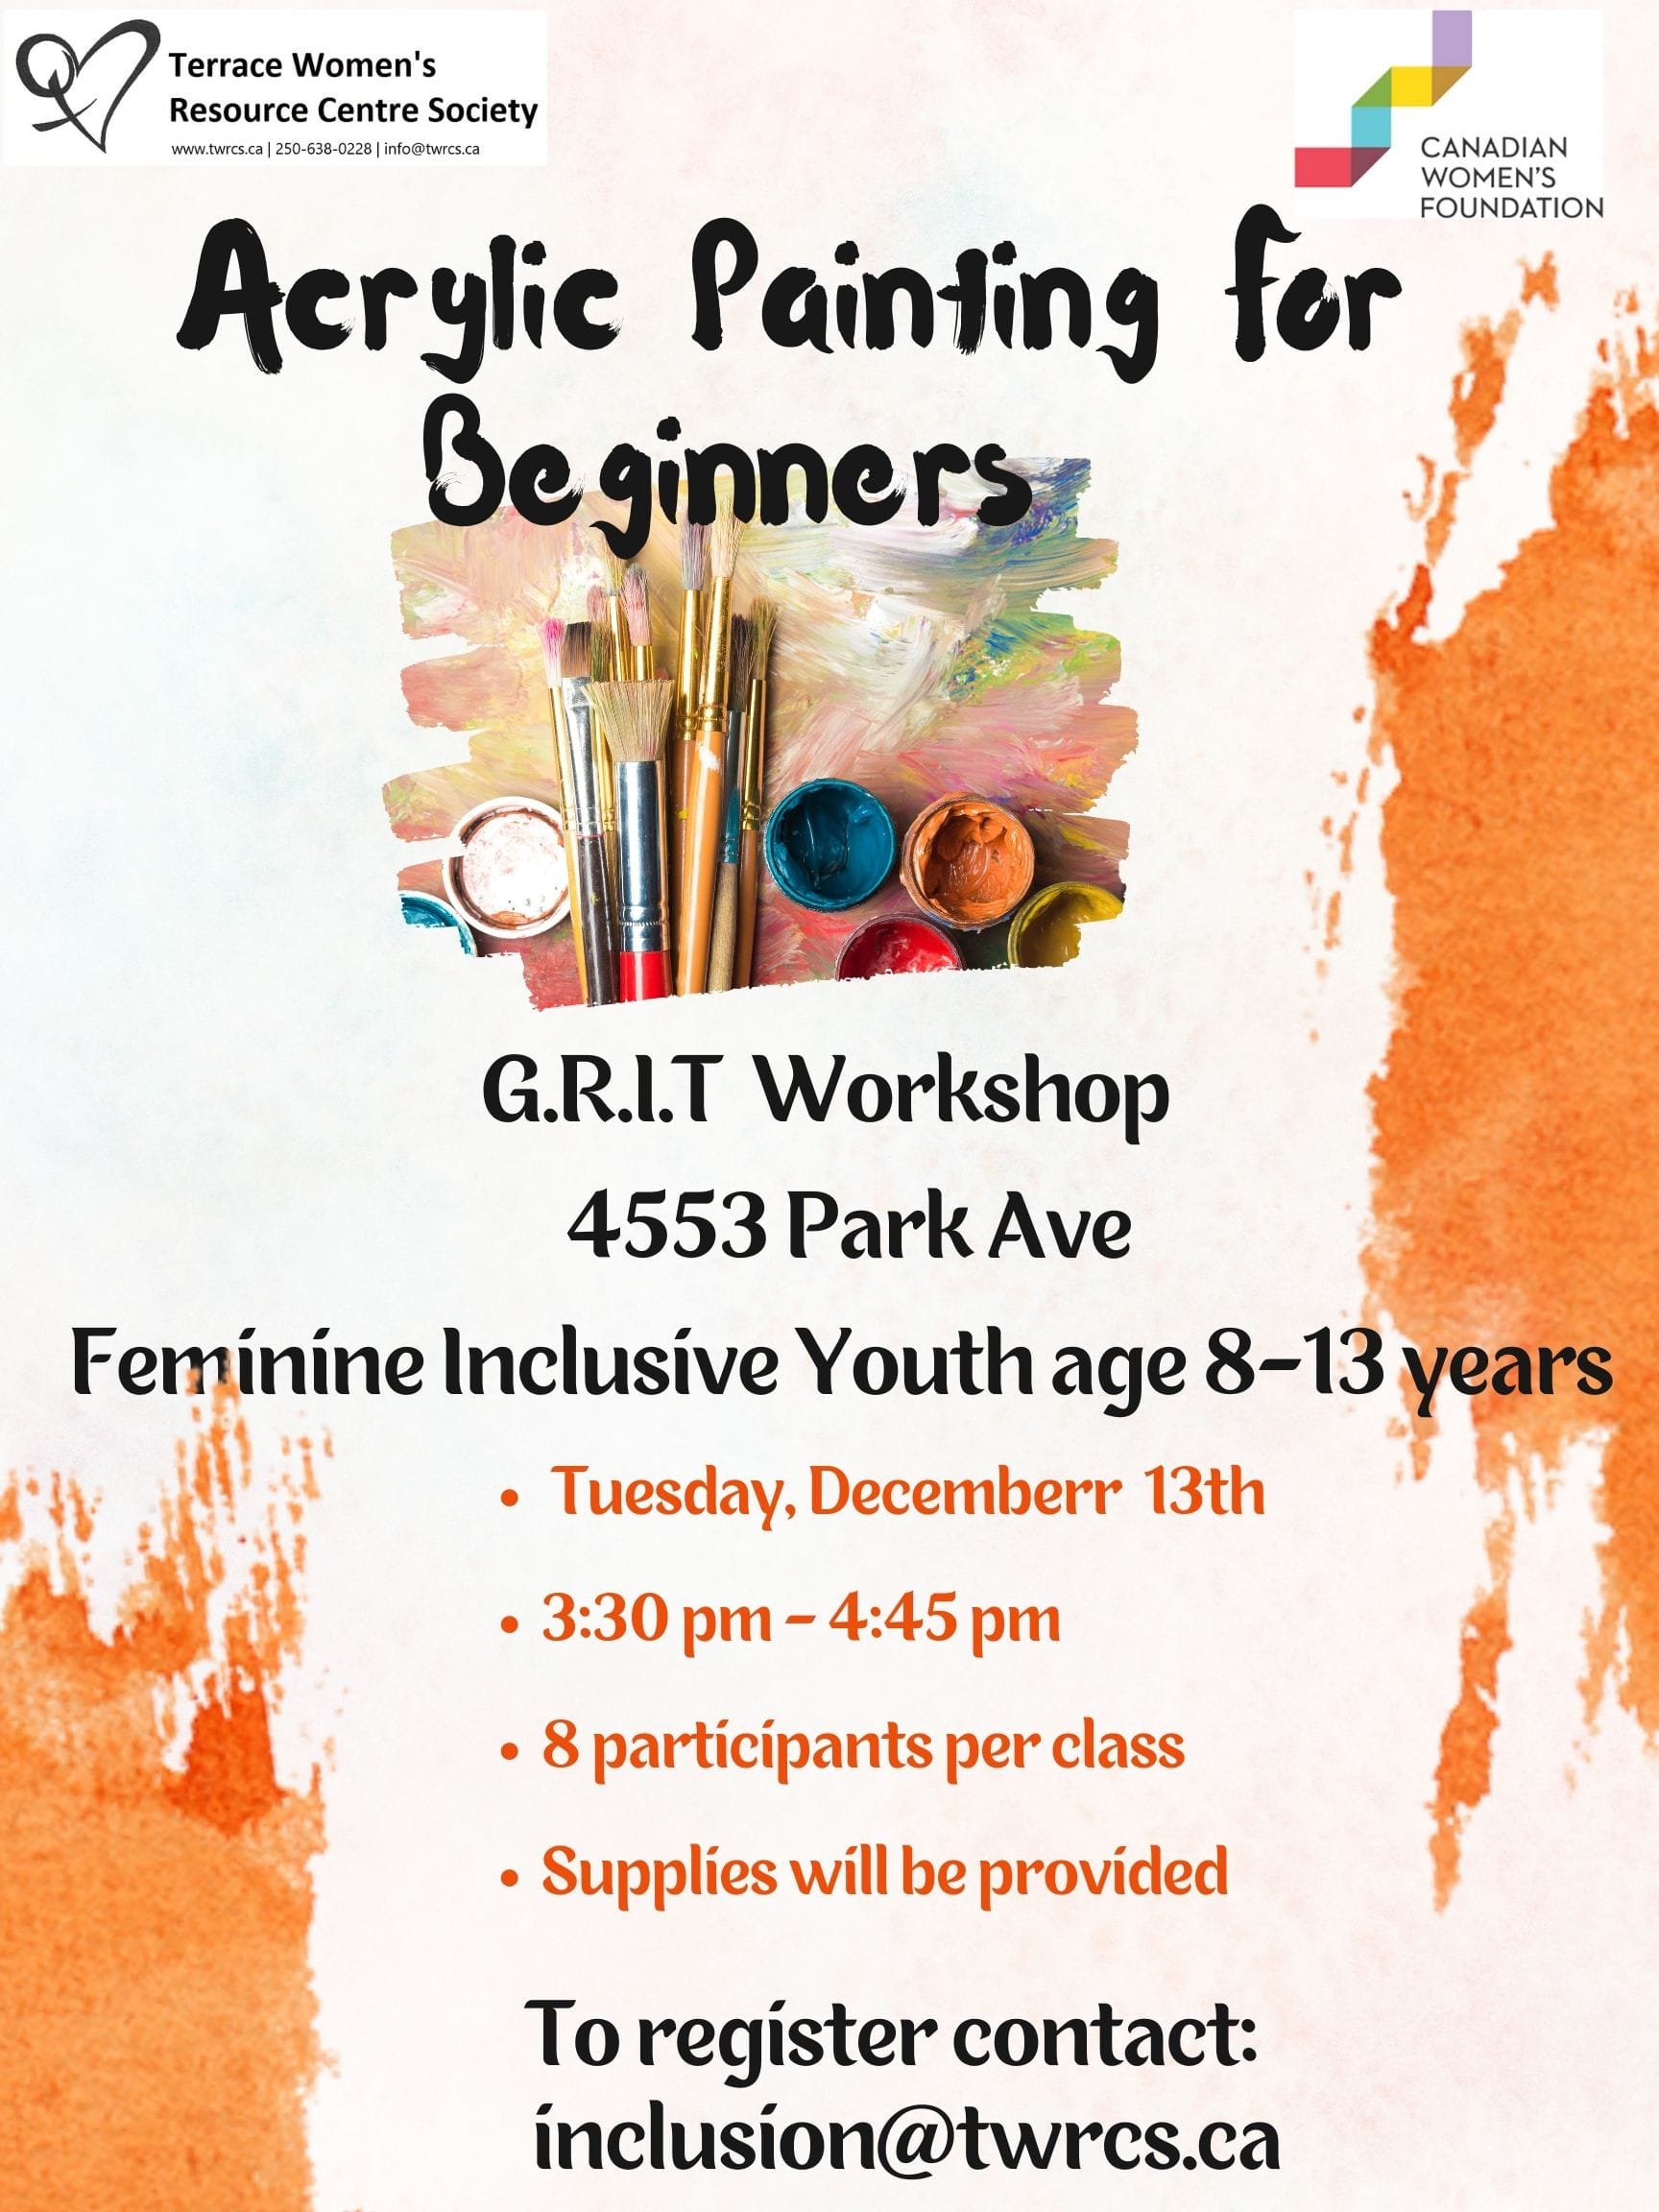 TWRCS_GRIT Girls Group_Workshop Acylic Painting for beginners